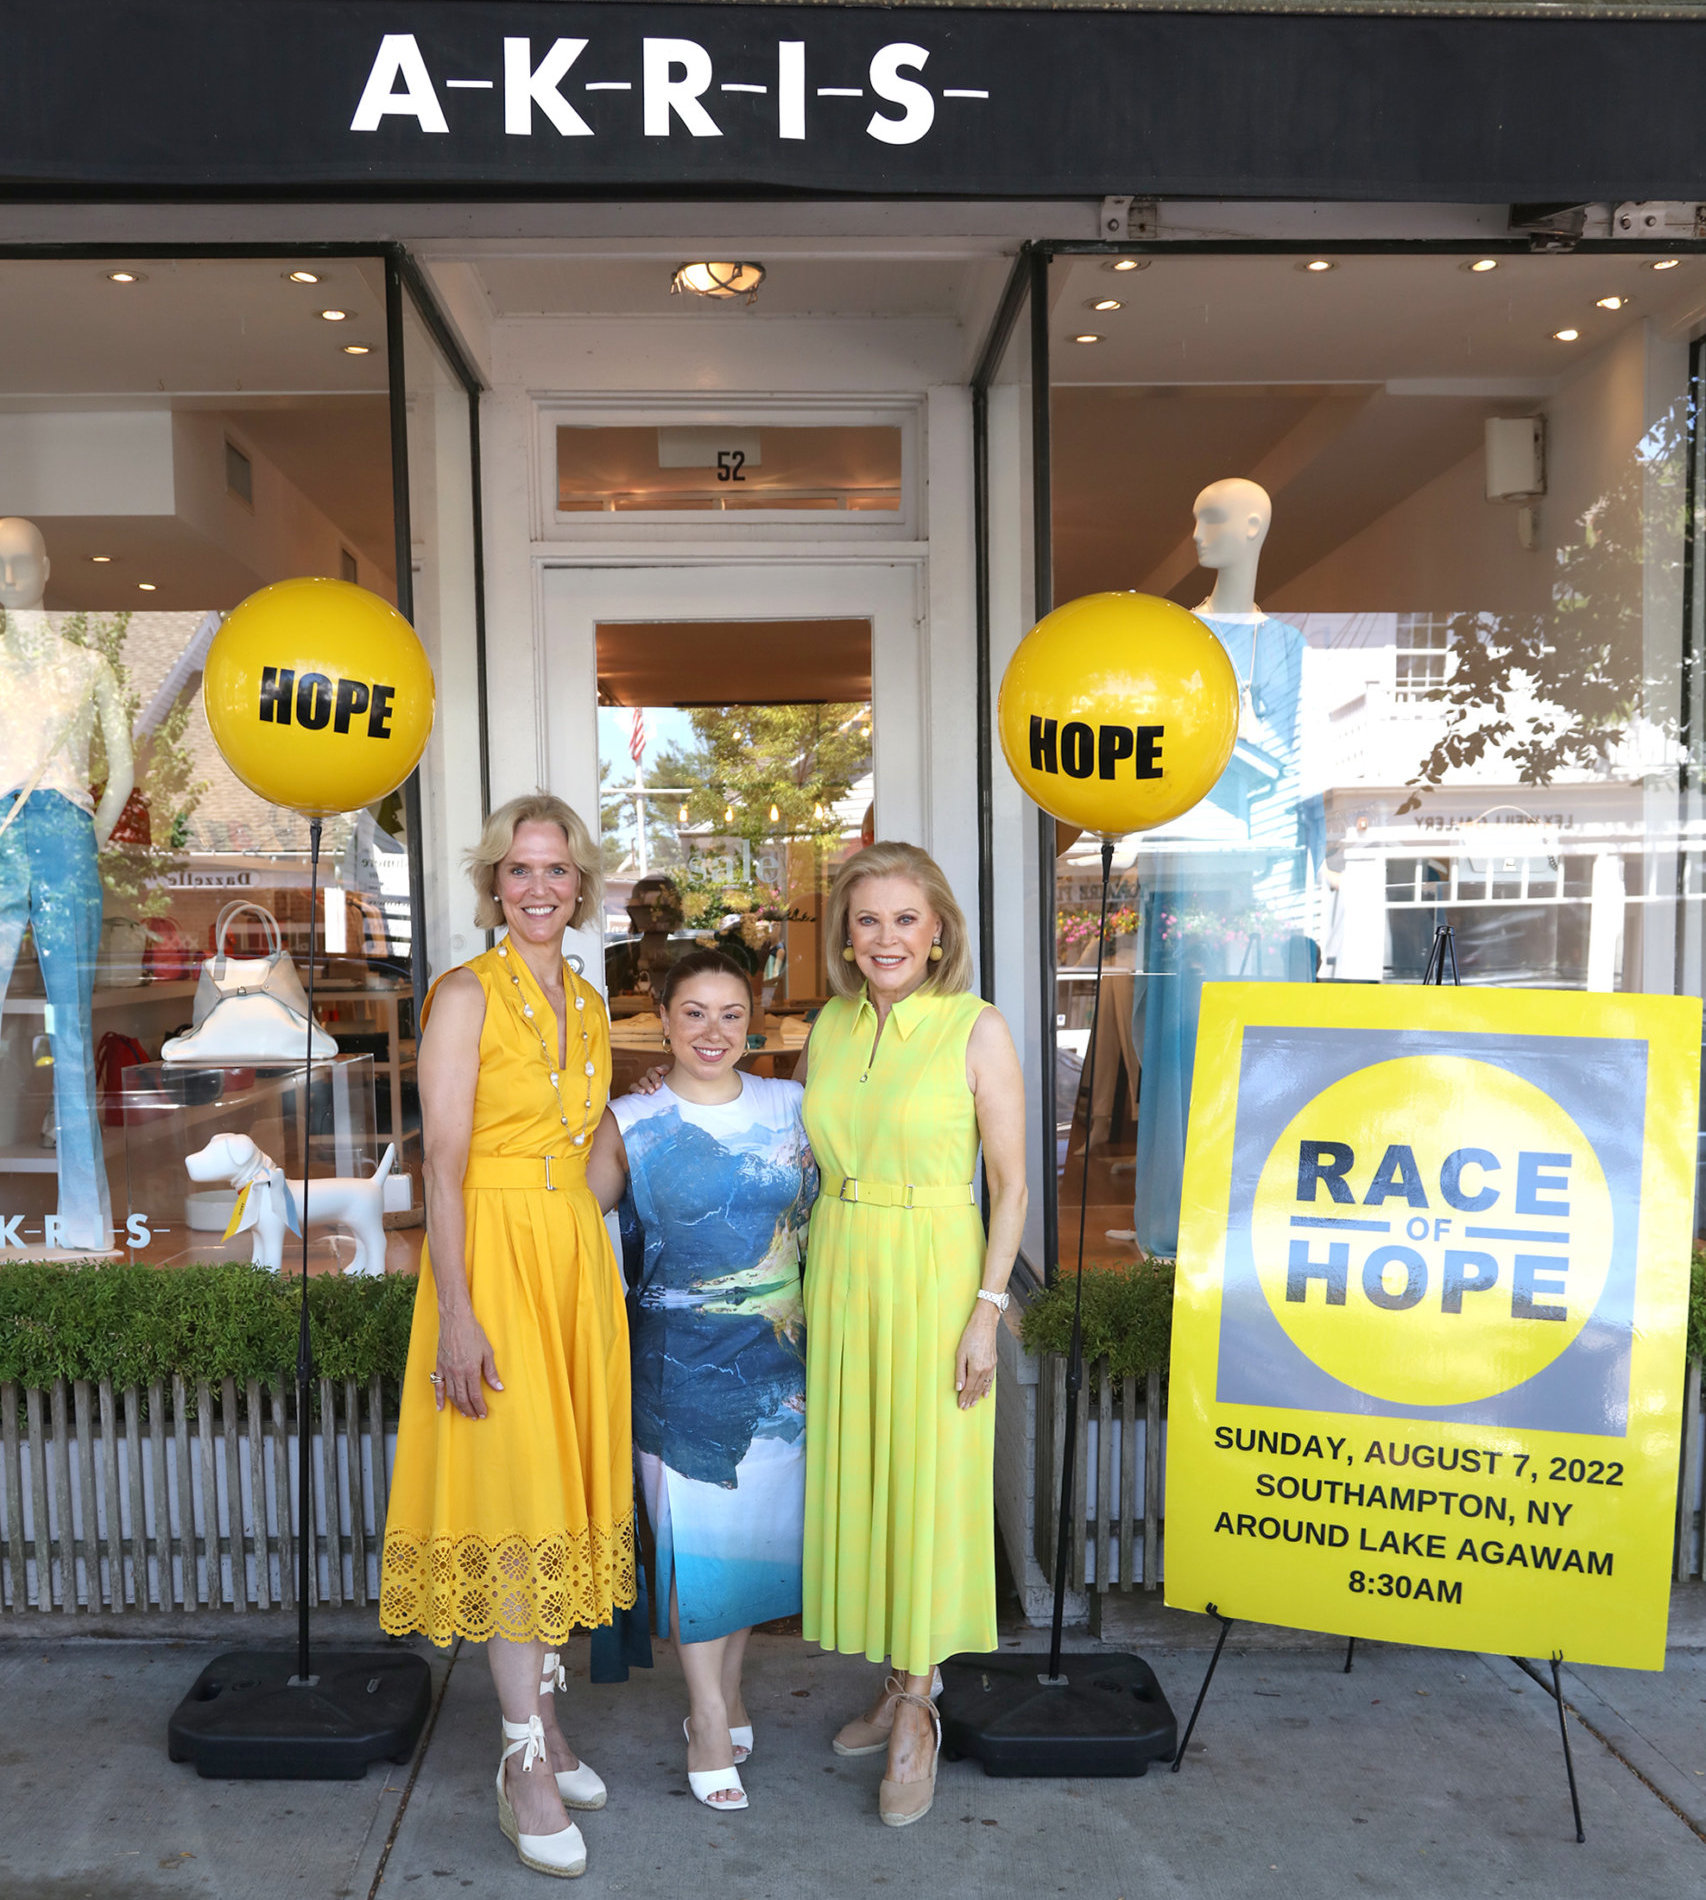 Louisa Benton, Katie Walsh, Audrey Gruss launch the Week of Hope in Southampton with Race of Hope signs